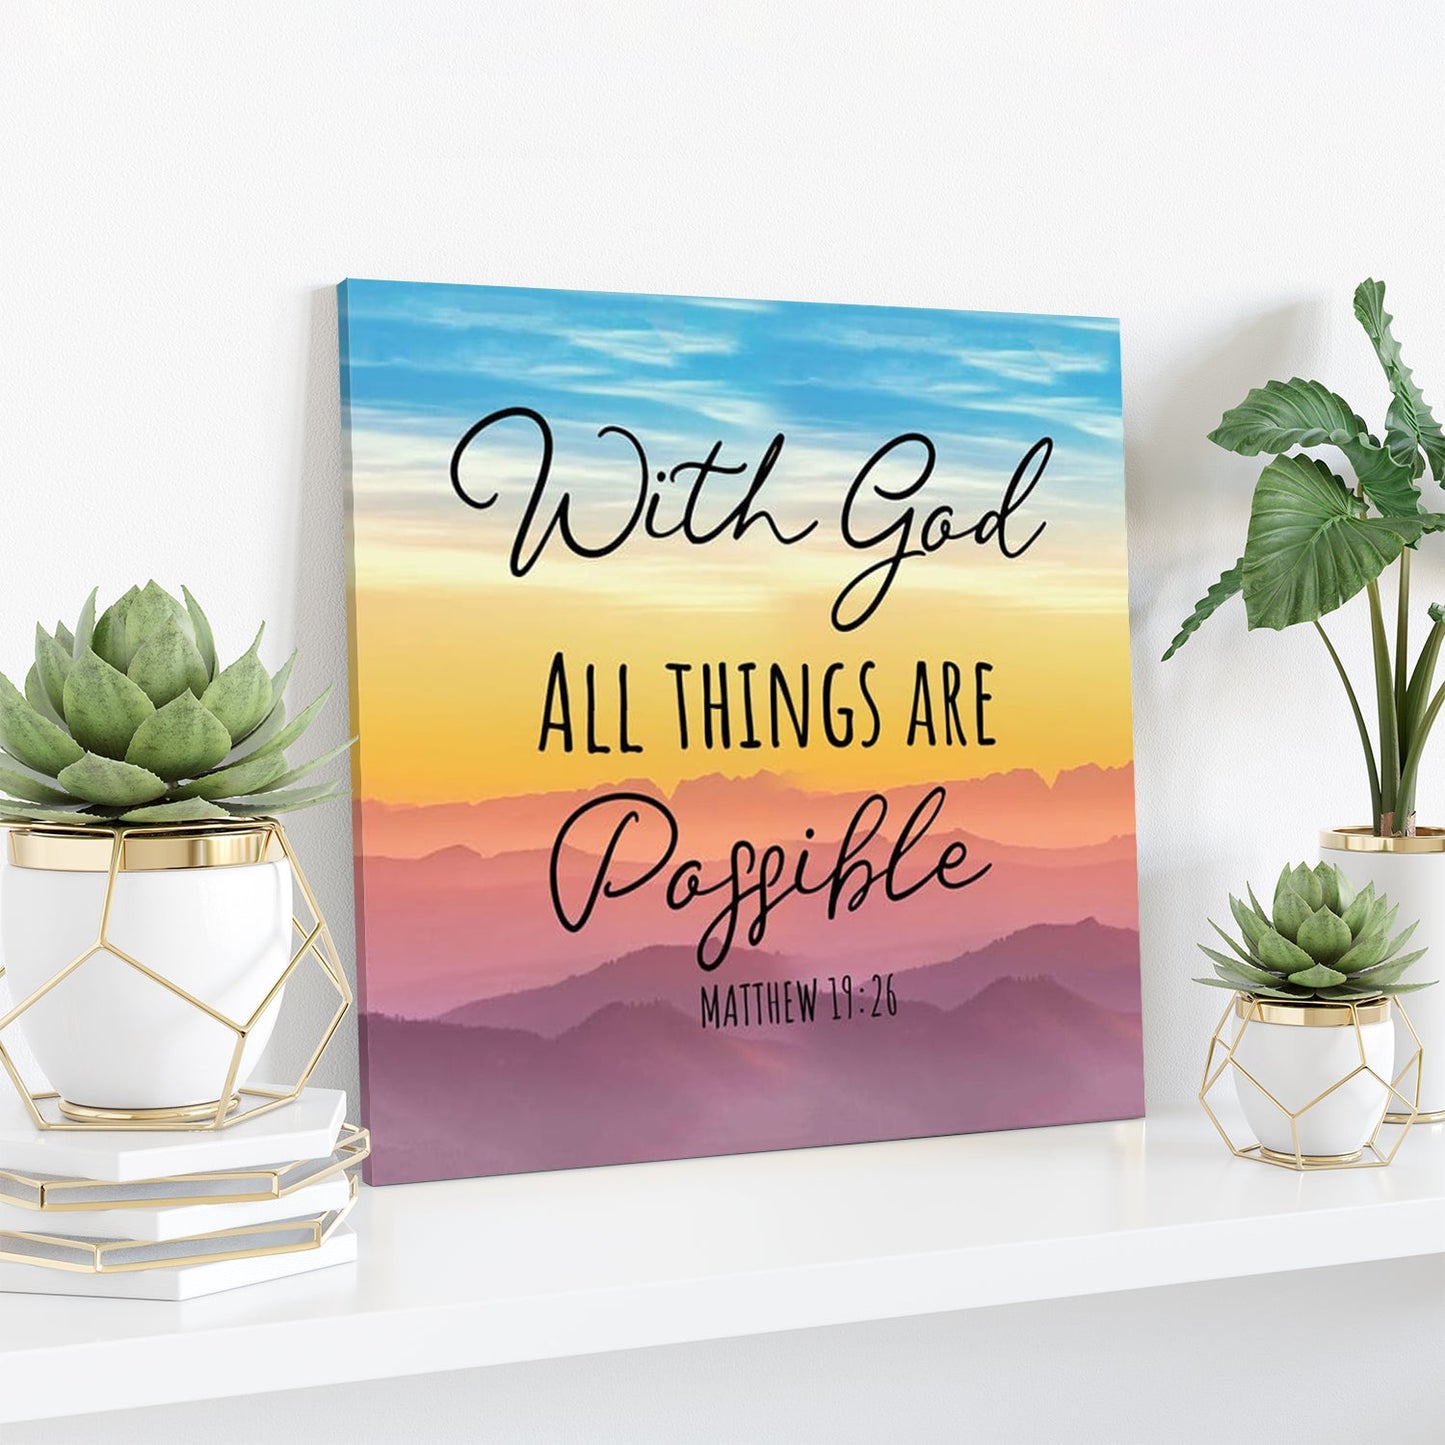 Bible Verse Canvas - With God All Things Are Possible Matthew 1926 Canvas Art - Scripture Canvas Wall Art - Ciaocustom